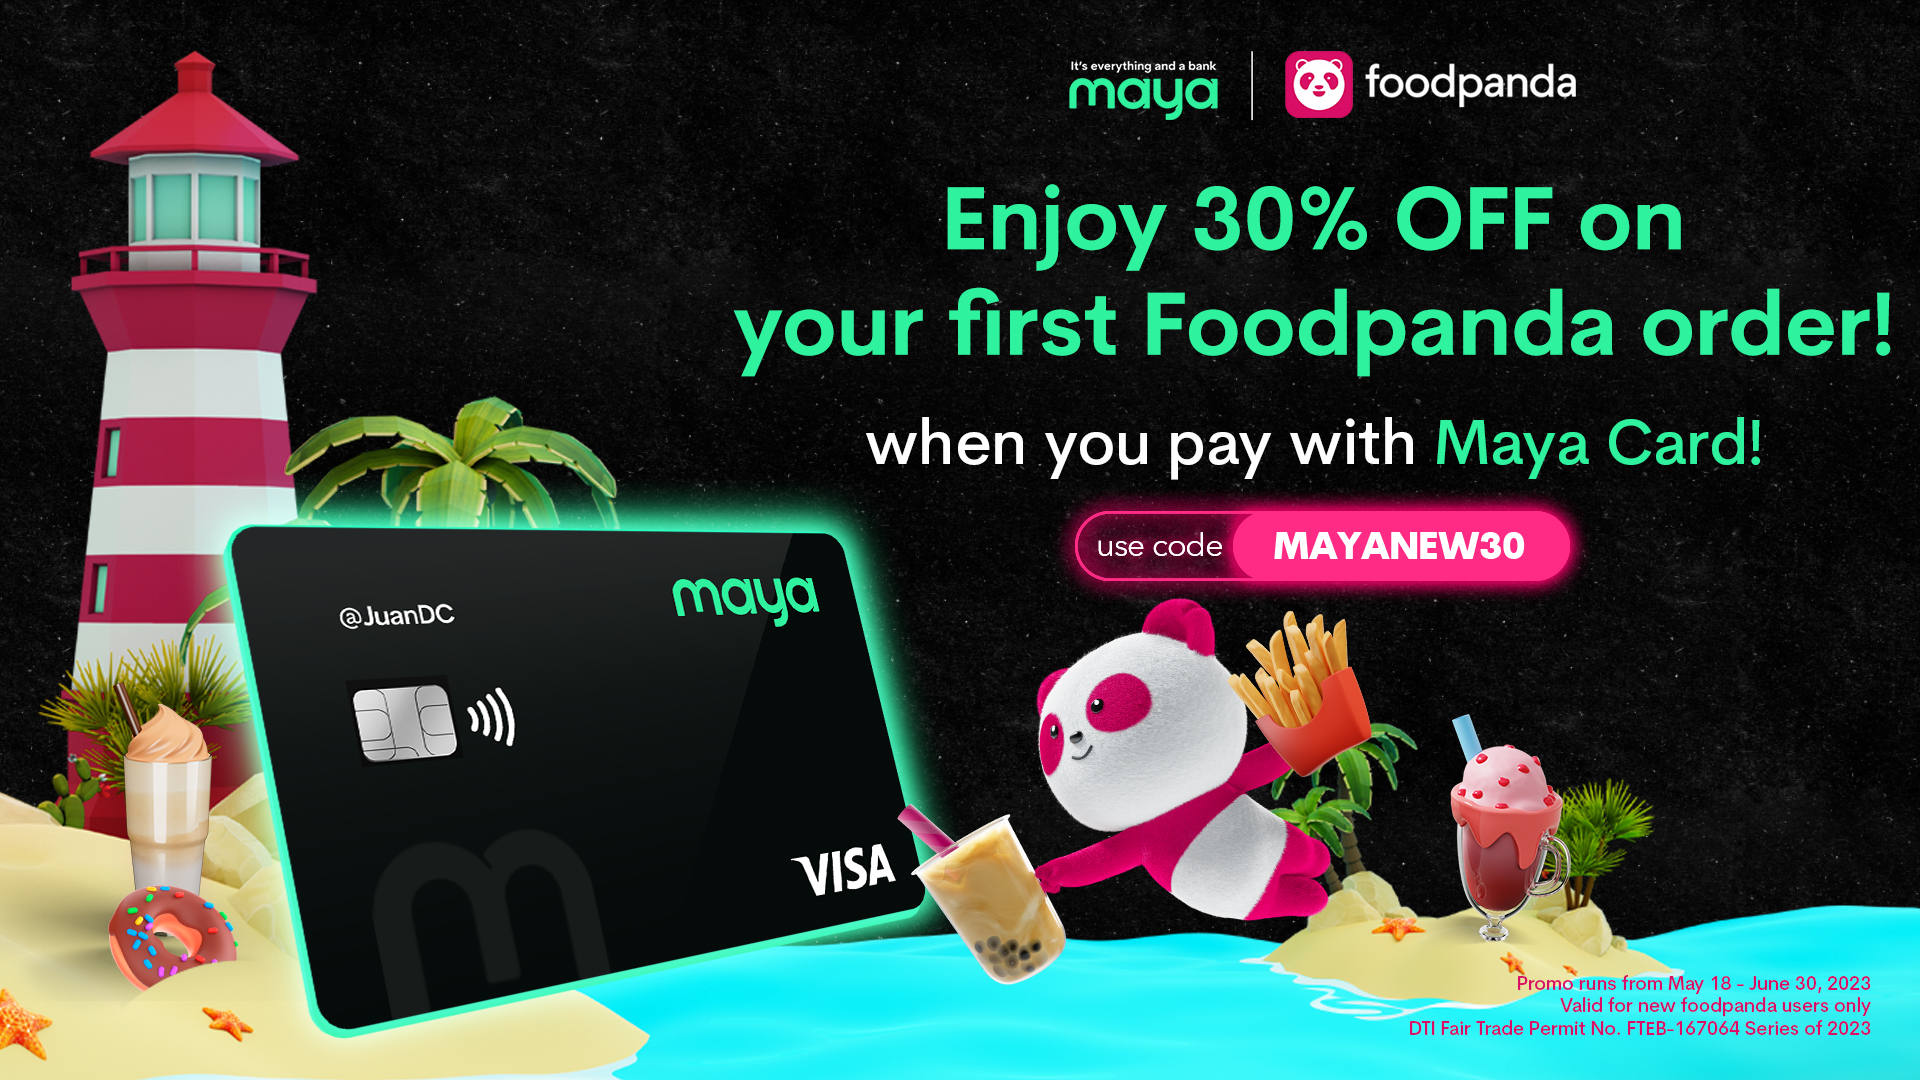 Get 30% OFF on your first Foodpanda order!